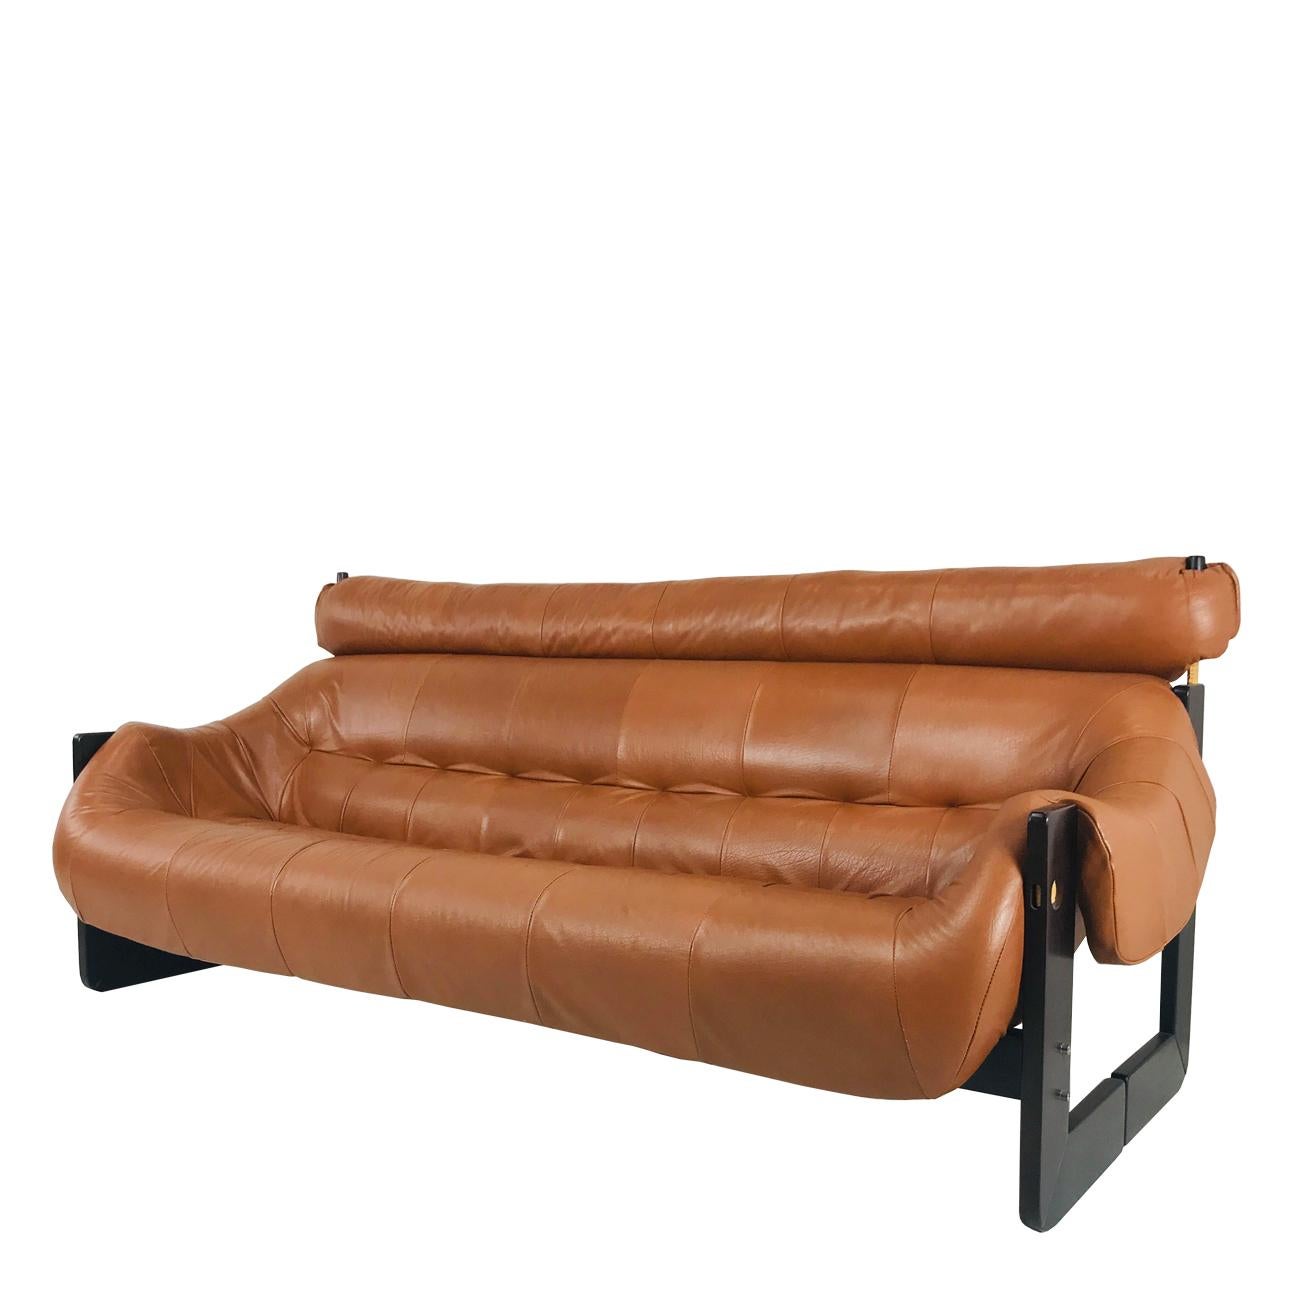 Percival Lafer Leather and Wood Sofa